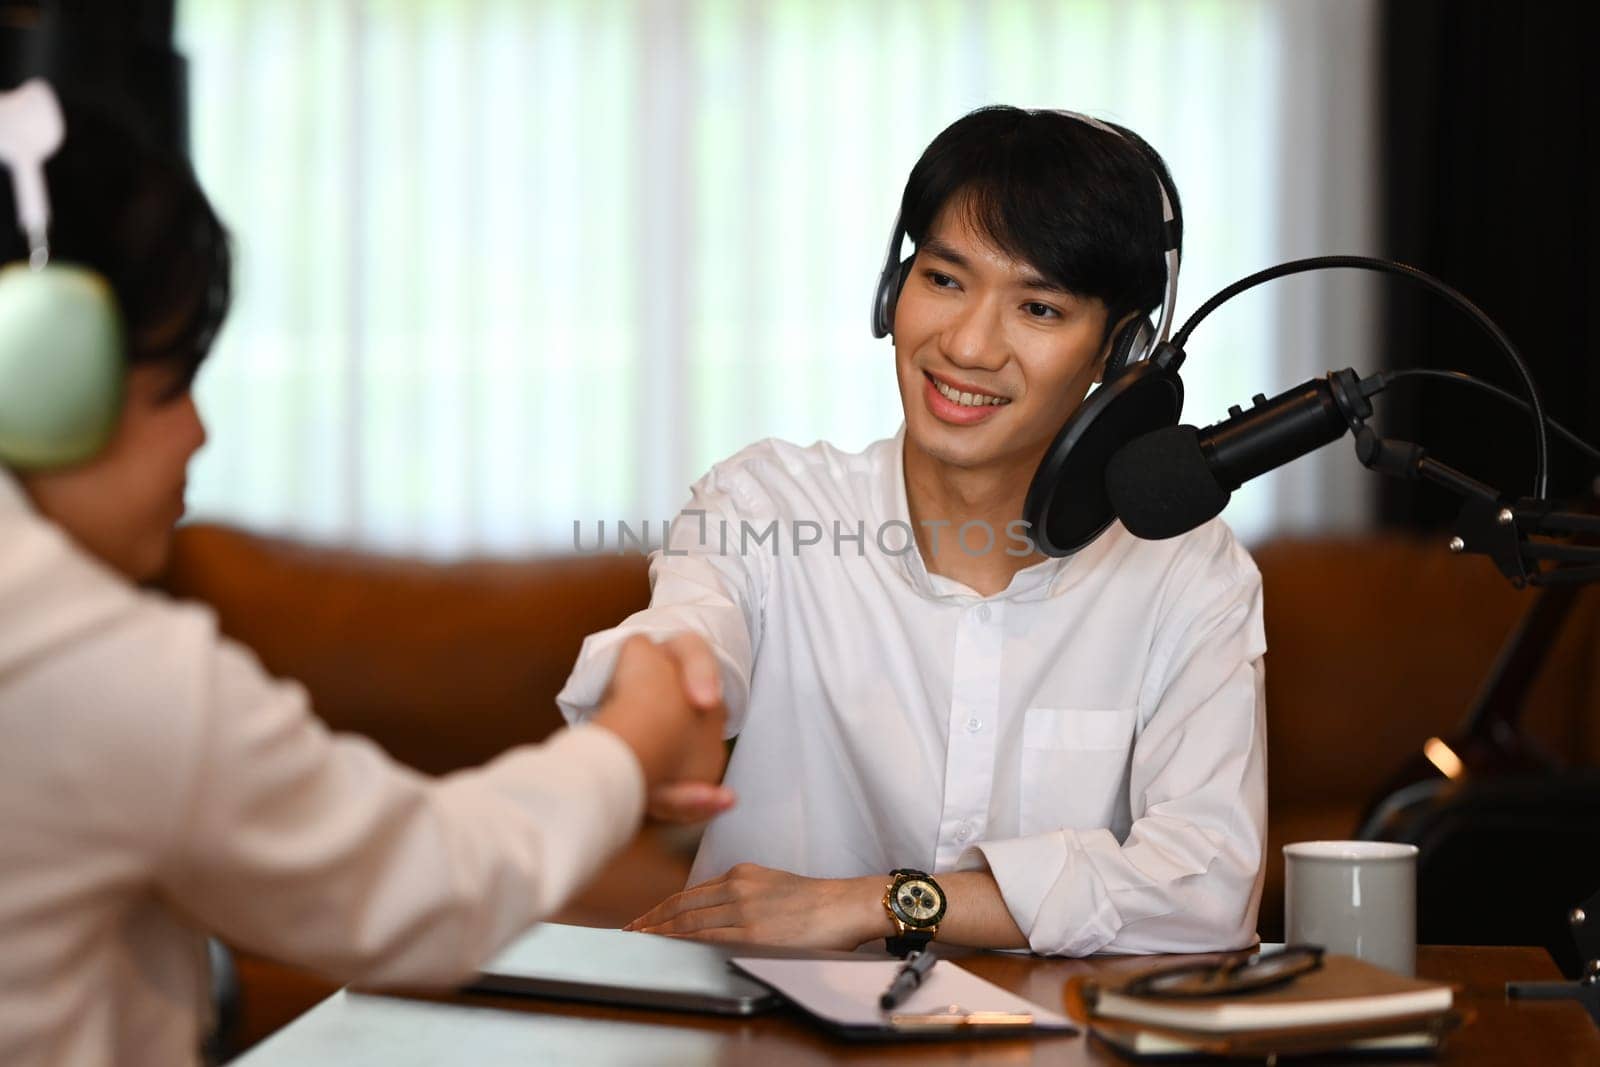 Smiling radio host shaking hands with her guest after interviewing. Podcasts and technology concept by prathanchorruangsak